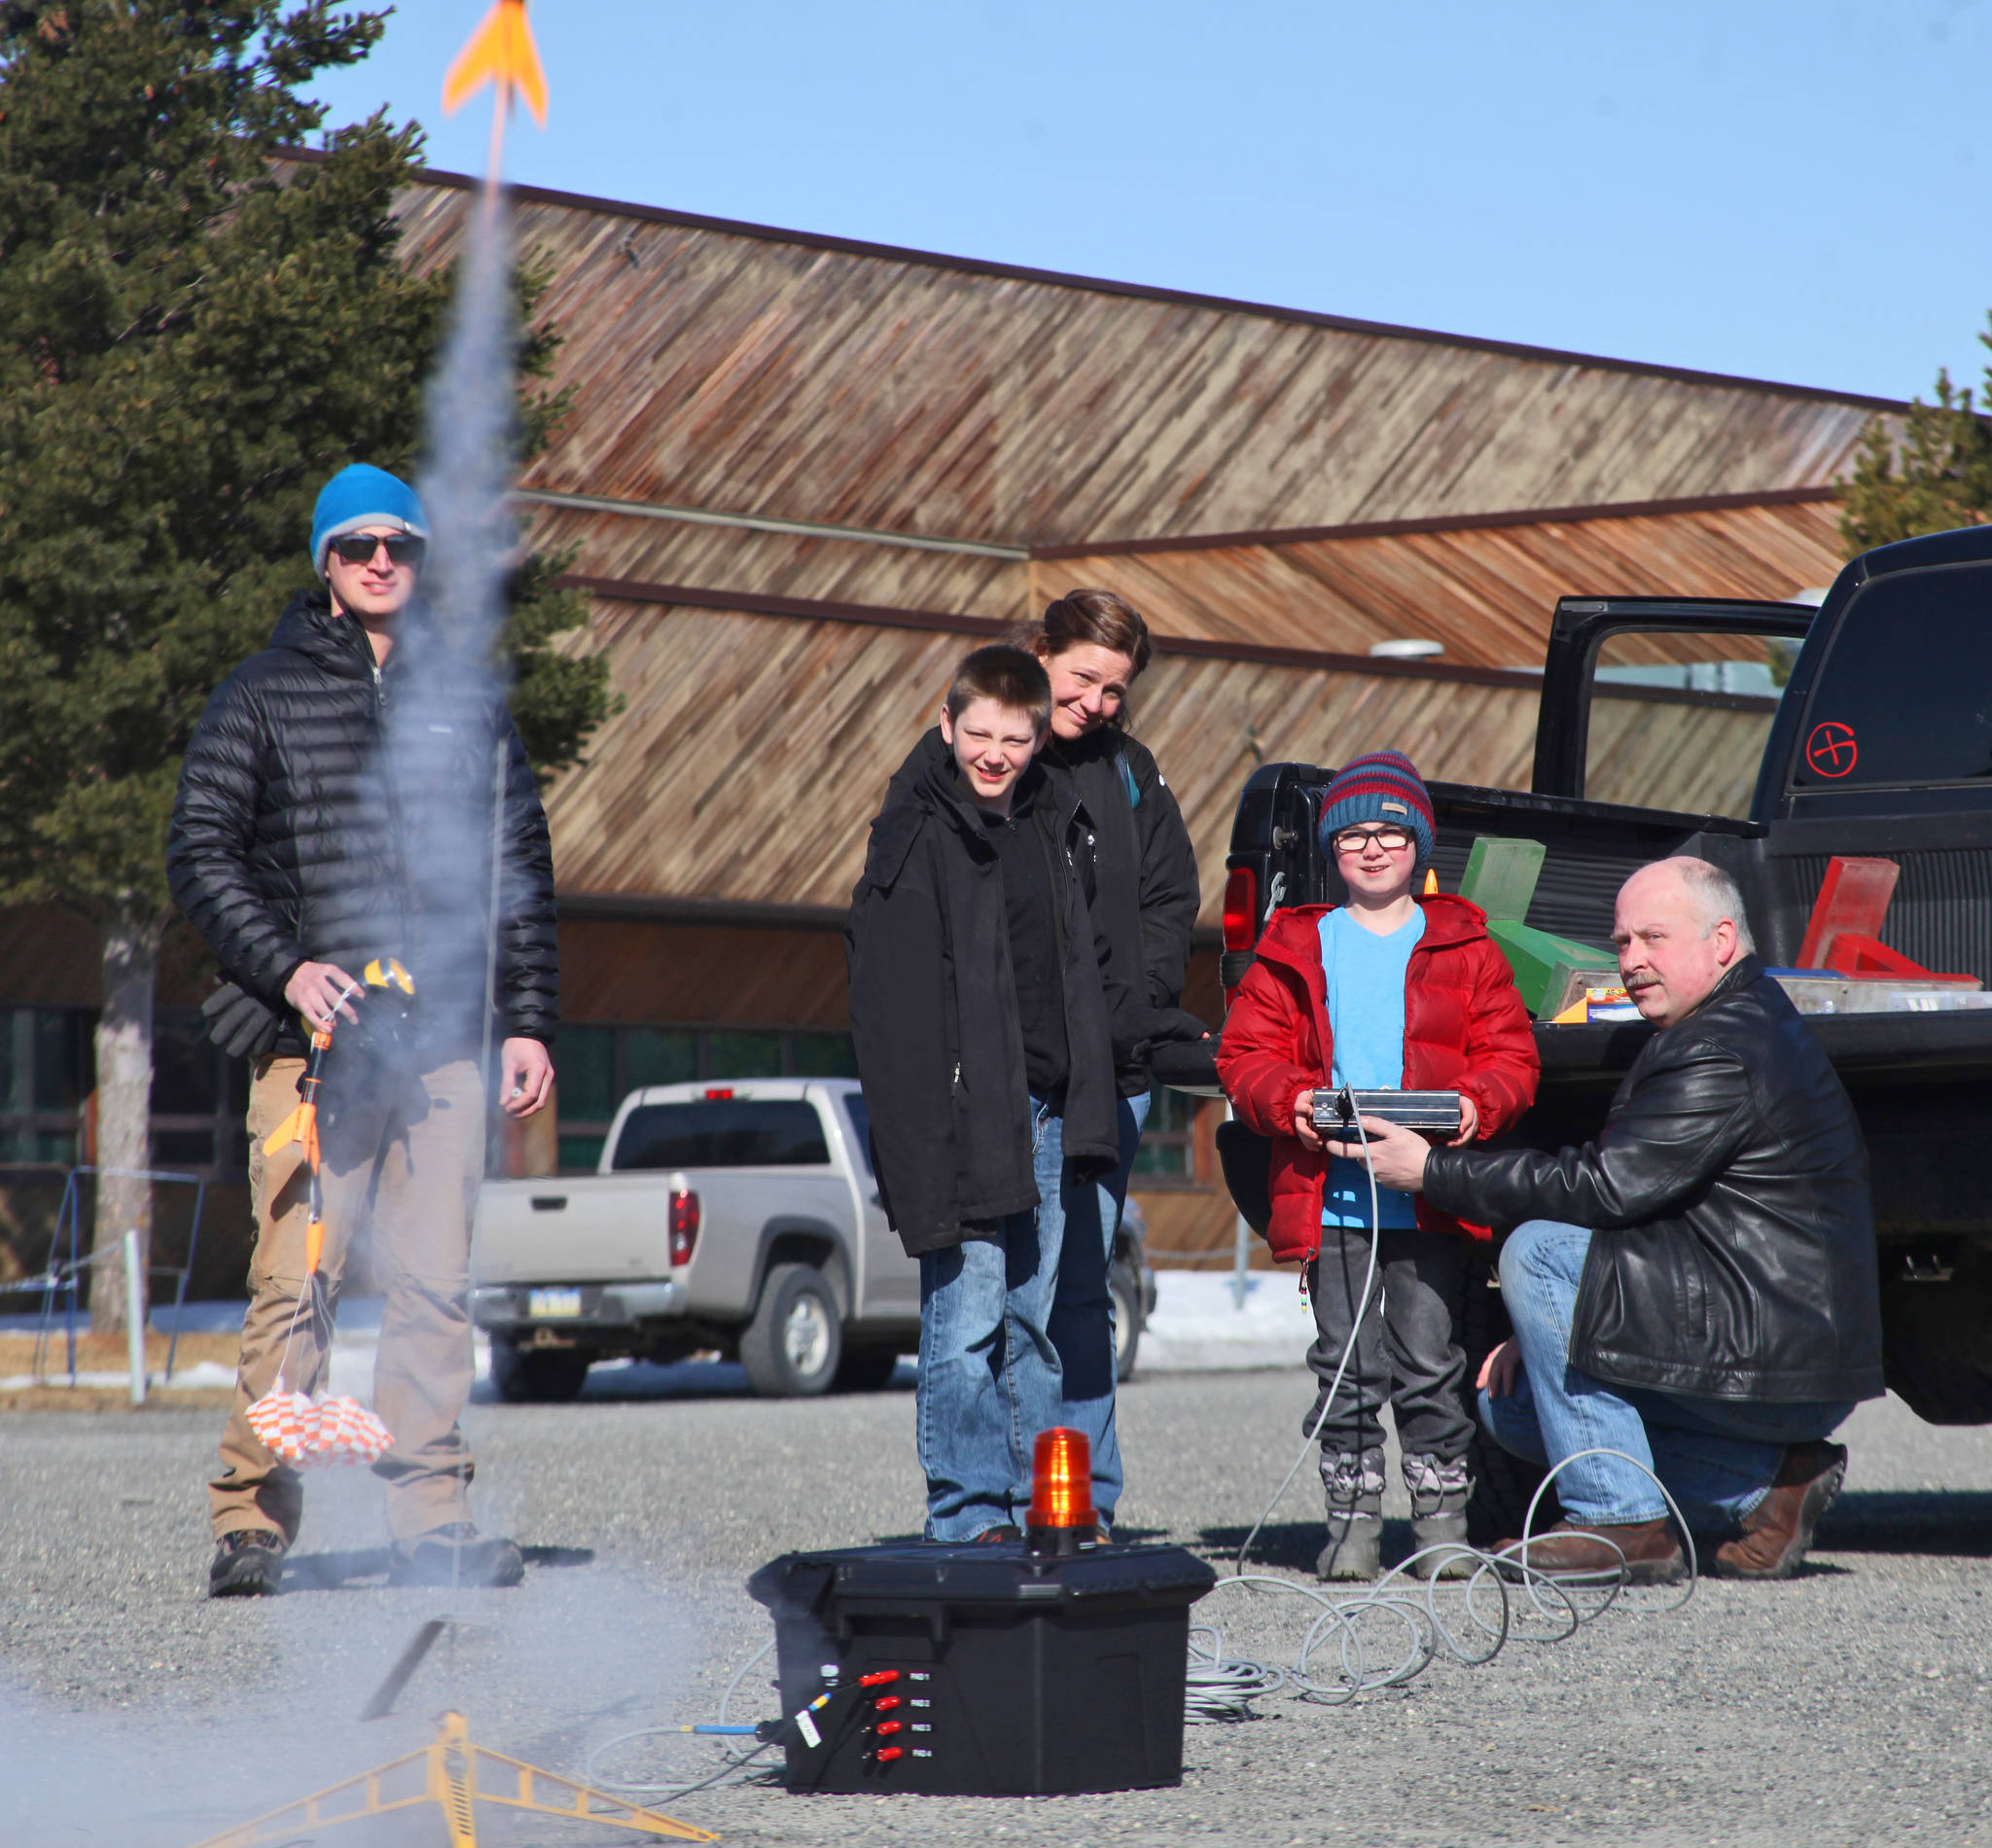 With the push of a button, Owen Walsh (in red) sends a model rocket into the sky, as instructor Scott Aleckson (right) and other students of his rocketry class watch in the parking lot of the Soldotna Regional Sports Complex in Soldotna, Alaska on Saturday, May 31, 2018. Aleckson said he made and launched his first plastic, balsa wood, and cardboard rocket as a 4th grade student at Soldotna Elementary School. Since then he’s built a custom launch system, he said, “with recycled electronics and a lot of soldering time.” Aleckson taught Saturday’s rocketry class through the Soldotna Community Schools program, and would like to continue spreading the hobby. “If I could get a model rocket club going, that’d be great,” he said. “Stuff like this is much more fun in a group.” (Photo by Ben Boettger/Peninsula Clarion)